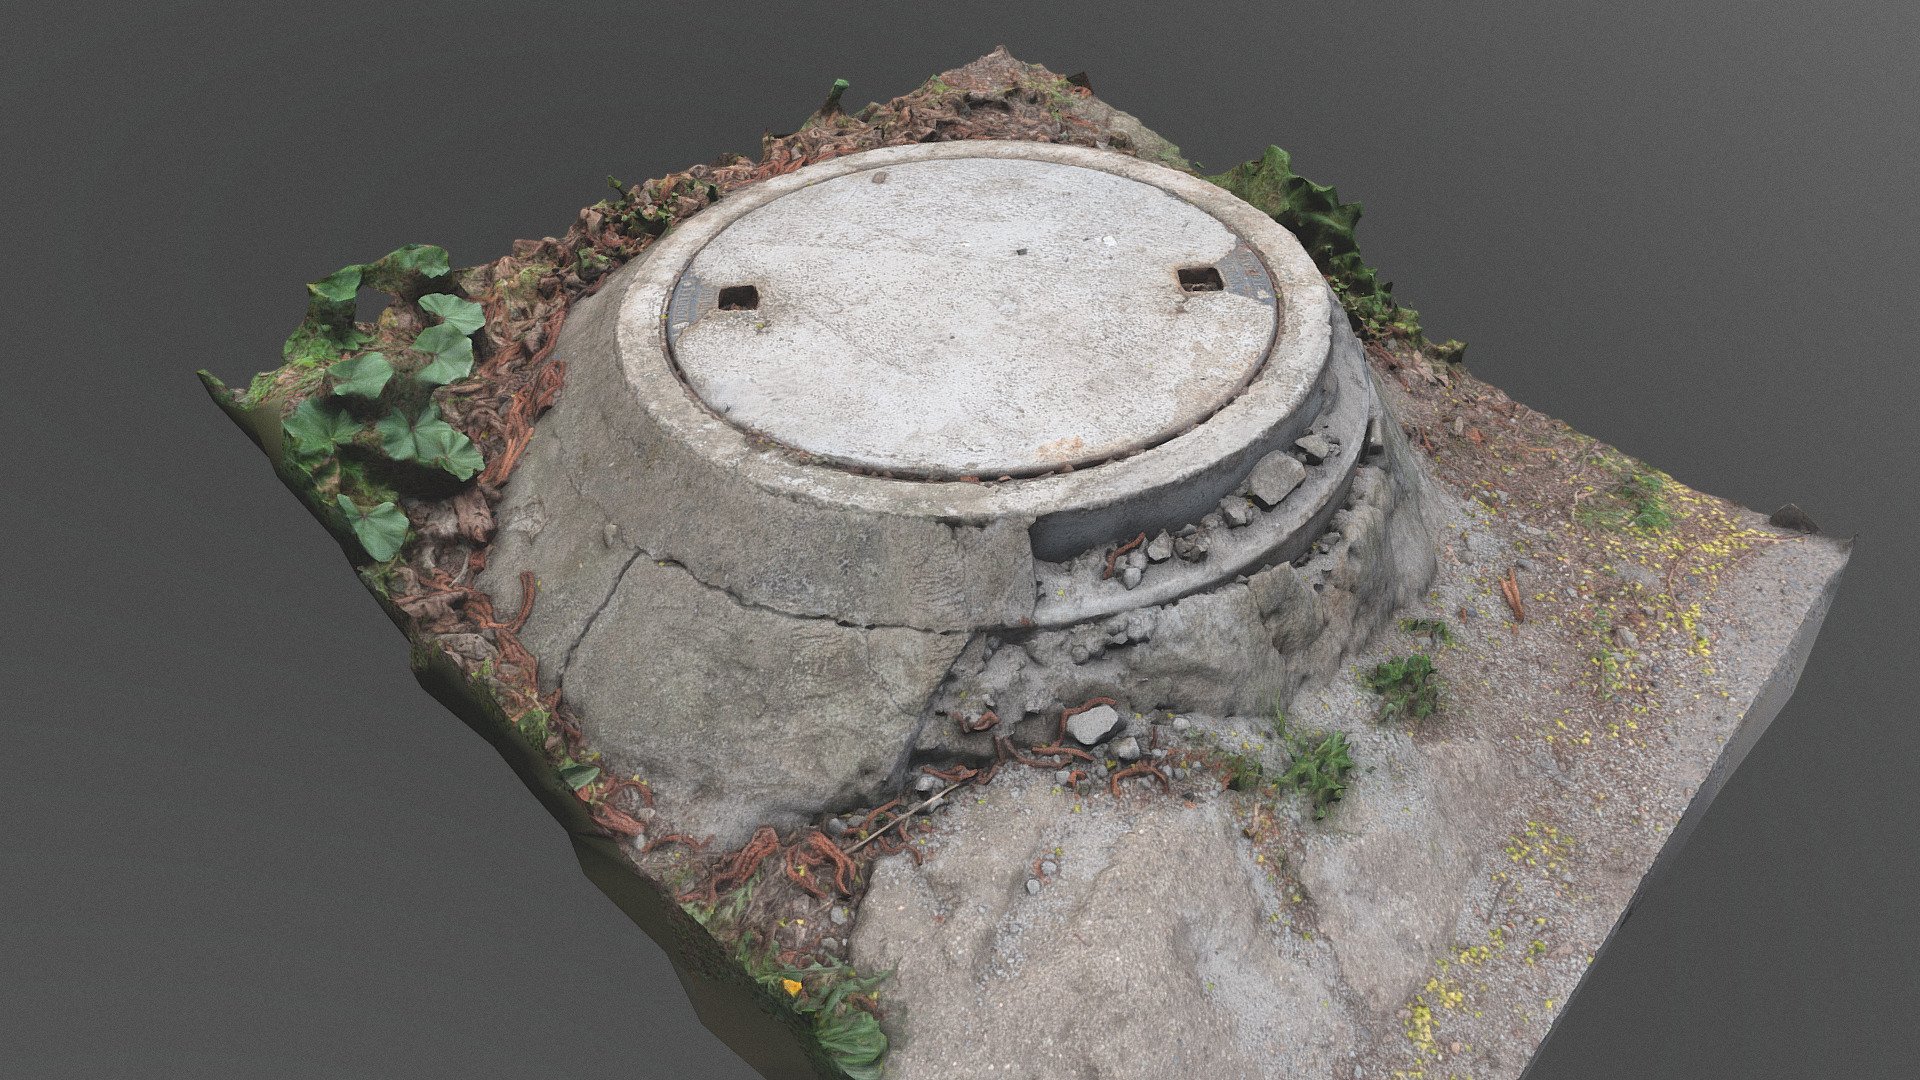 Sewer hatch concrete manhole cover with in a park hill

Photogrammetry scan 120x24MP - Sewer hatch concrete manhole cover - Buy Royalty Free 3D model by matousekfoto 3d model